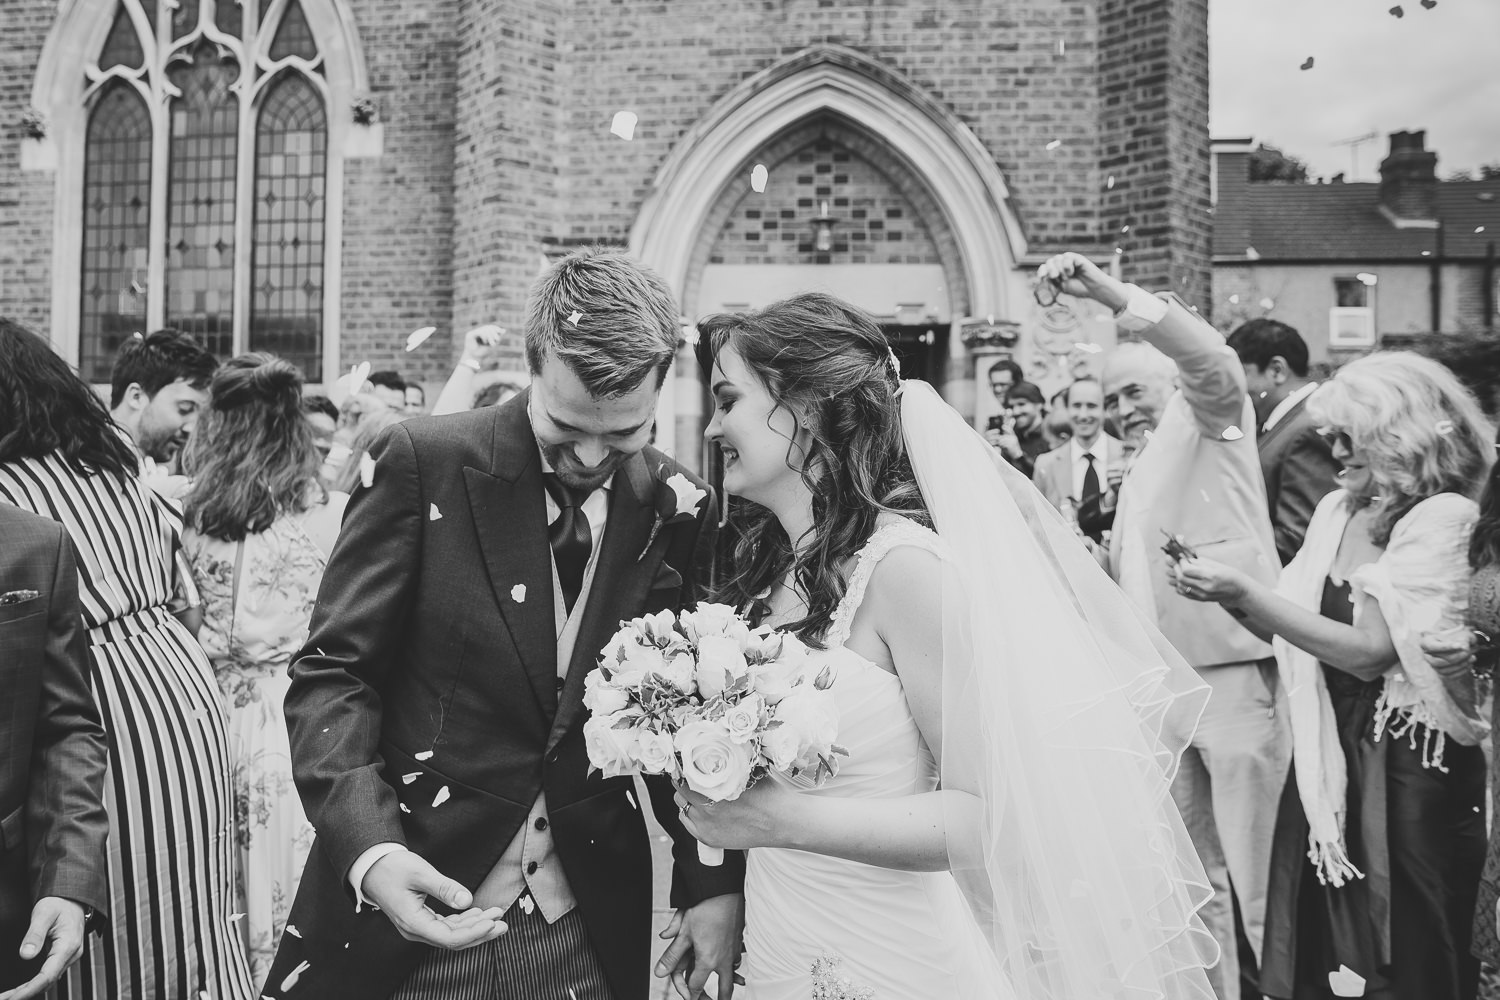 Black and white wedding photography of bride and groom walking through wedding confetti and smiling